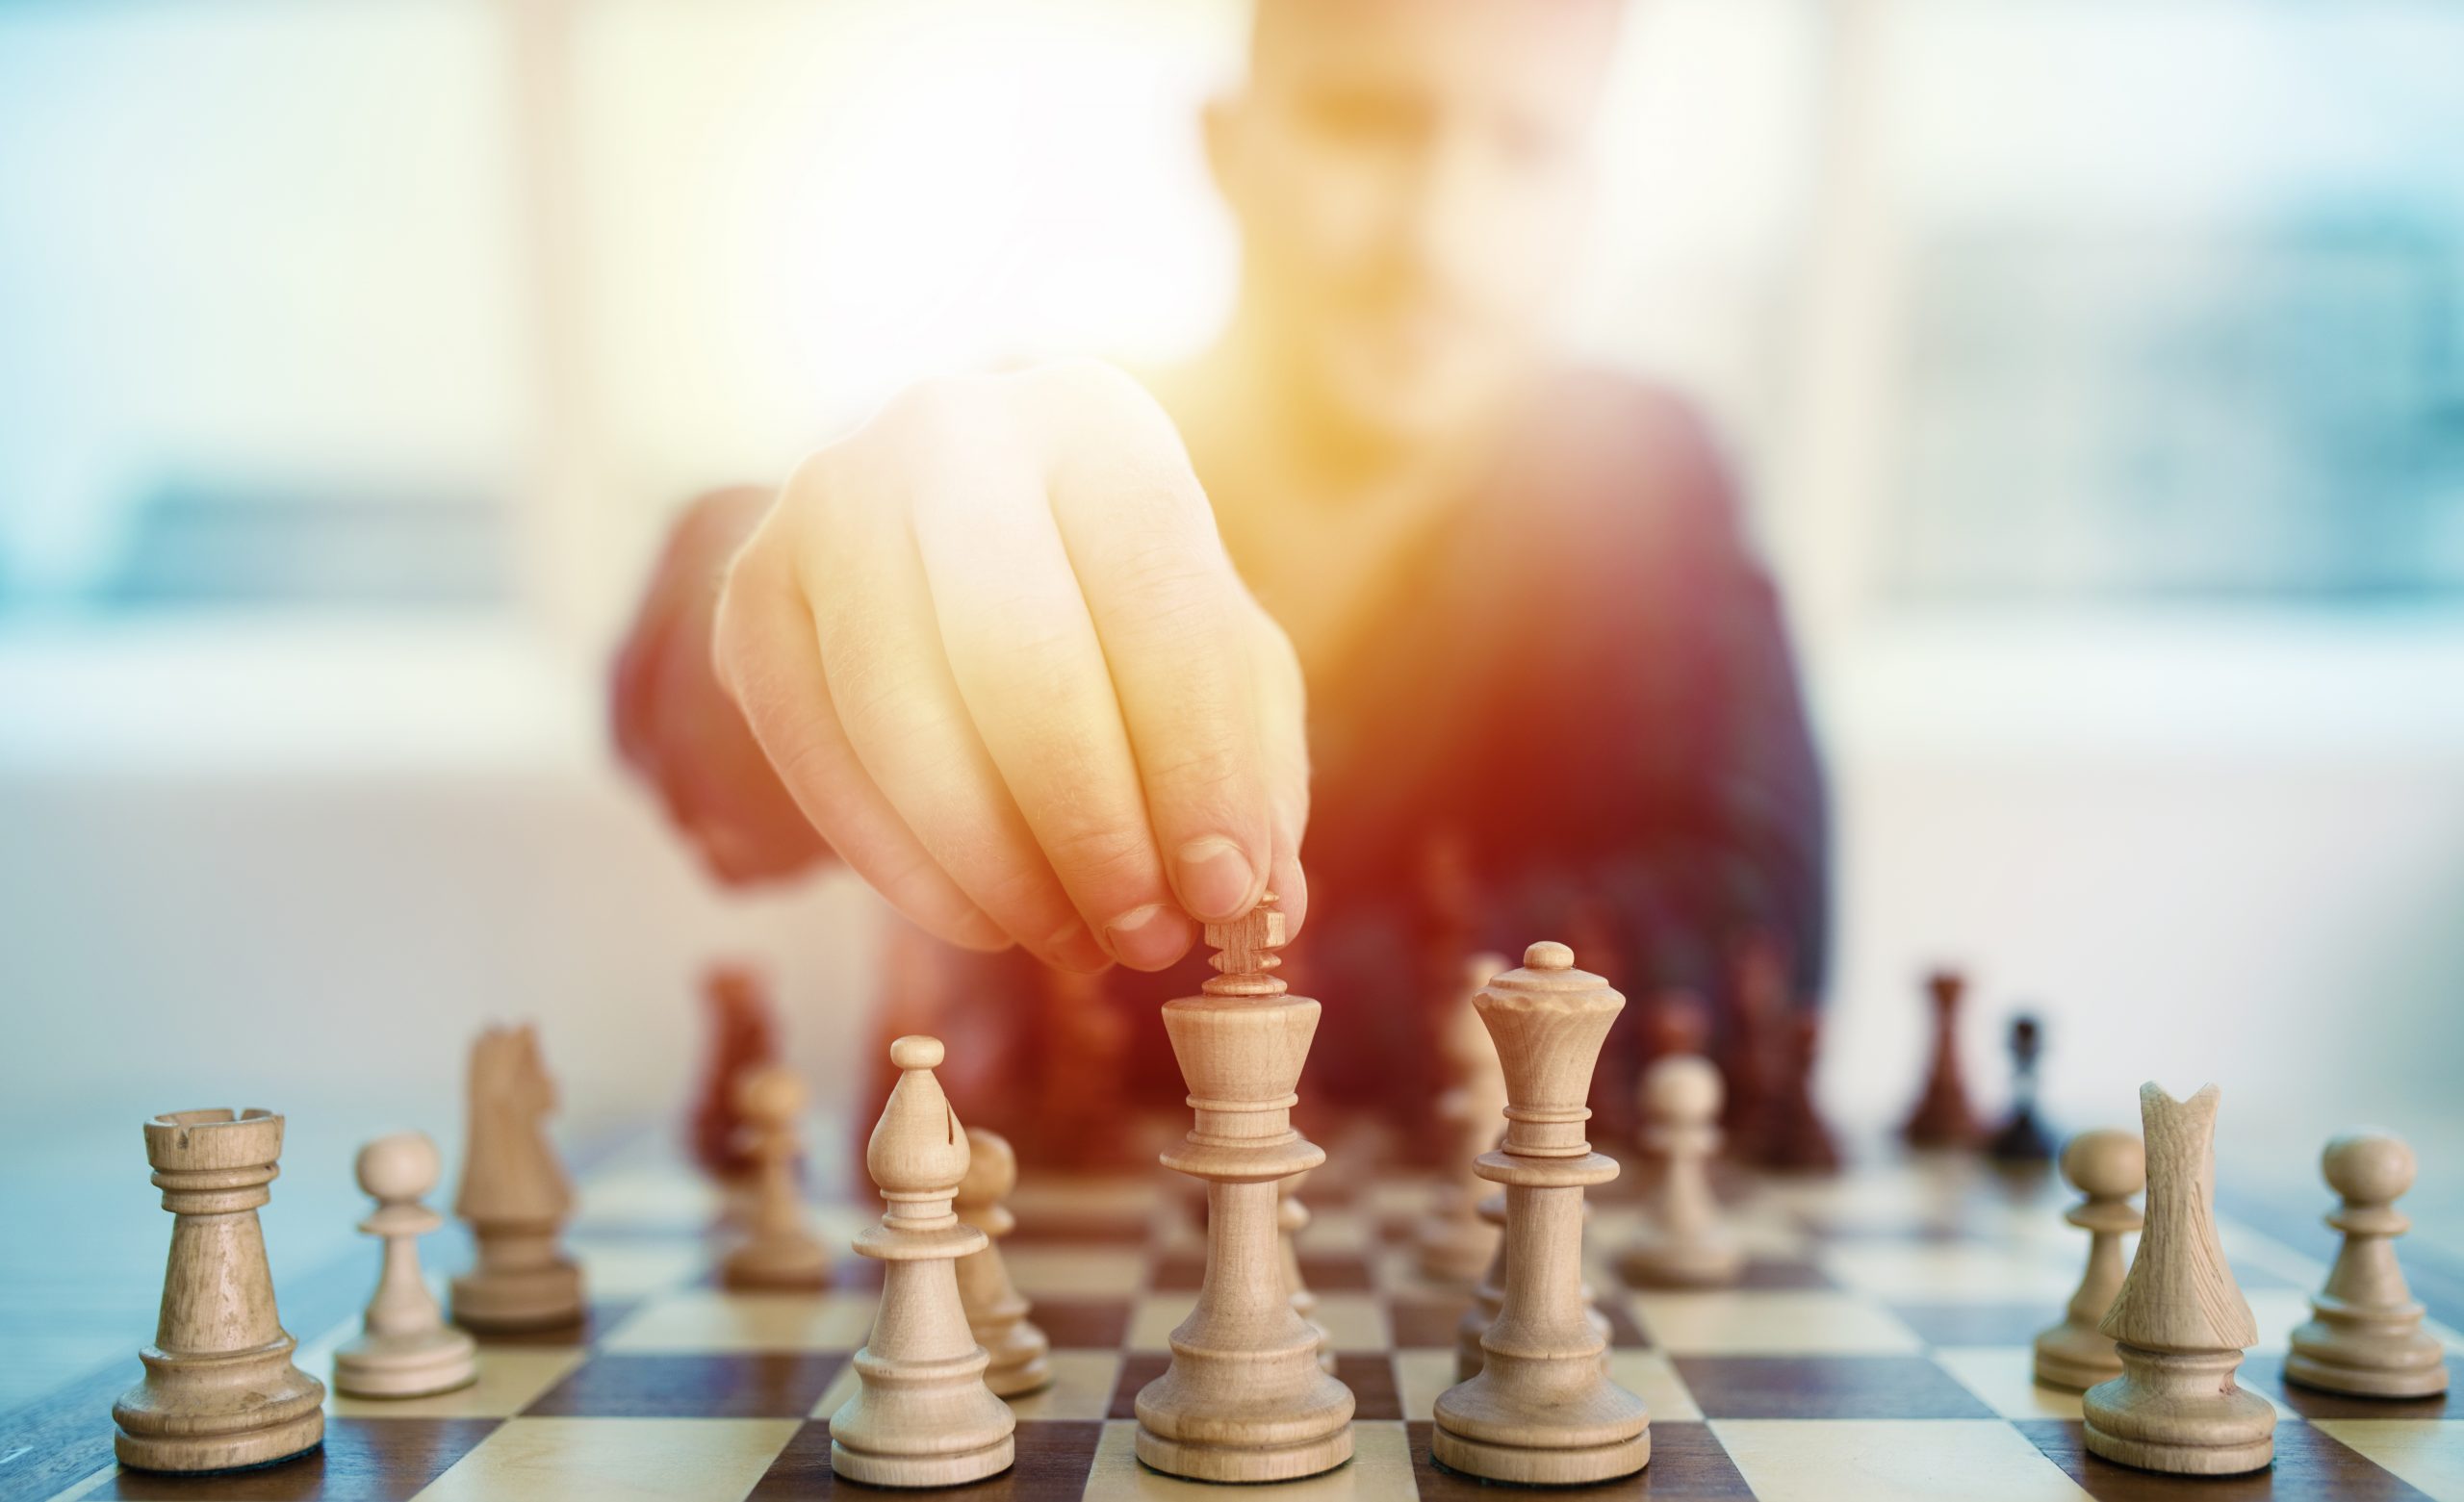 Play Online Chess Games and Test Your Skills Against Global Opponents